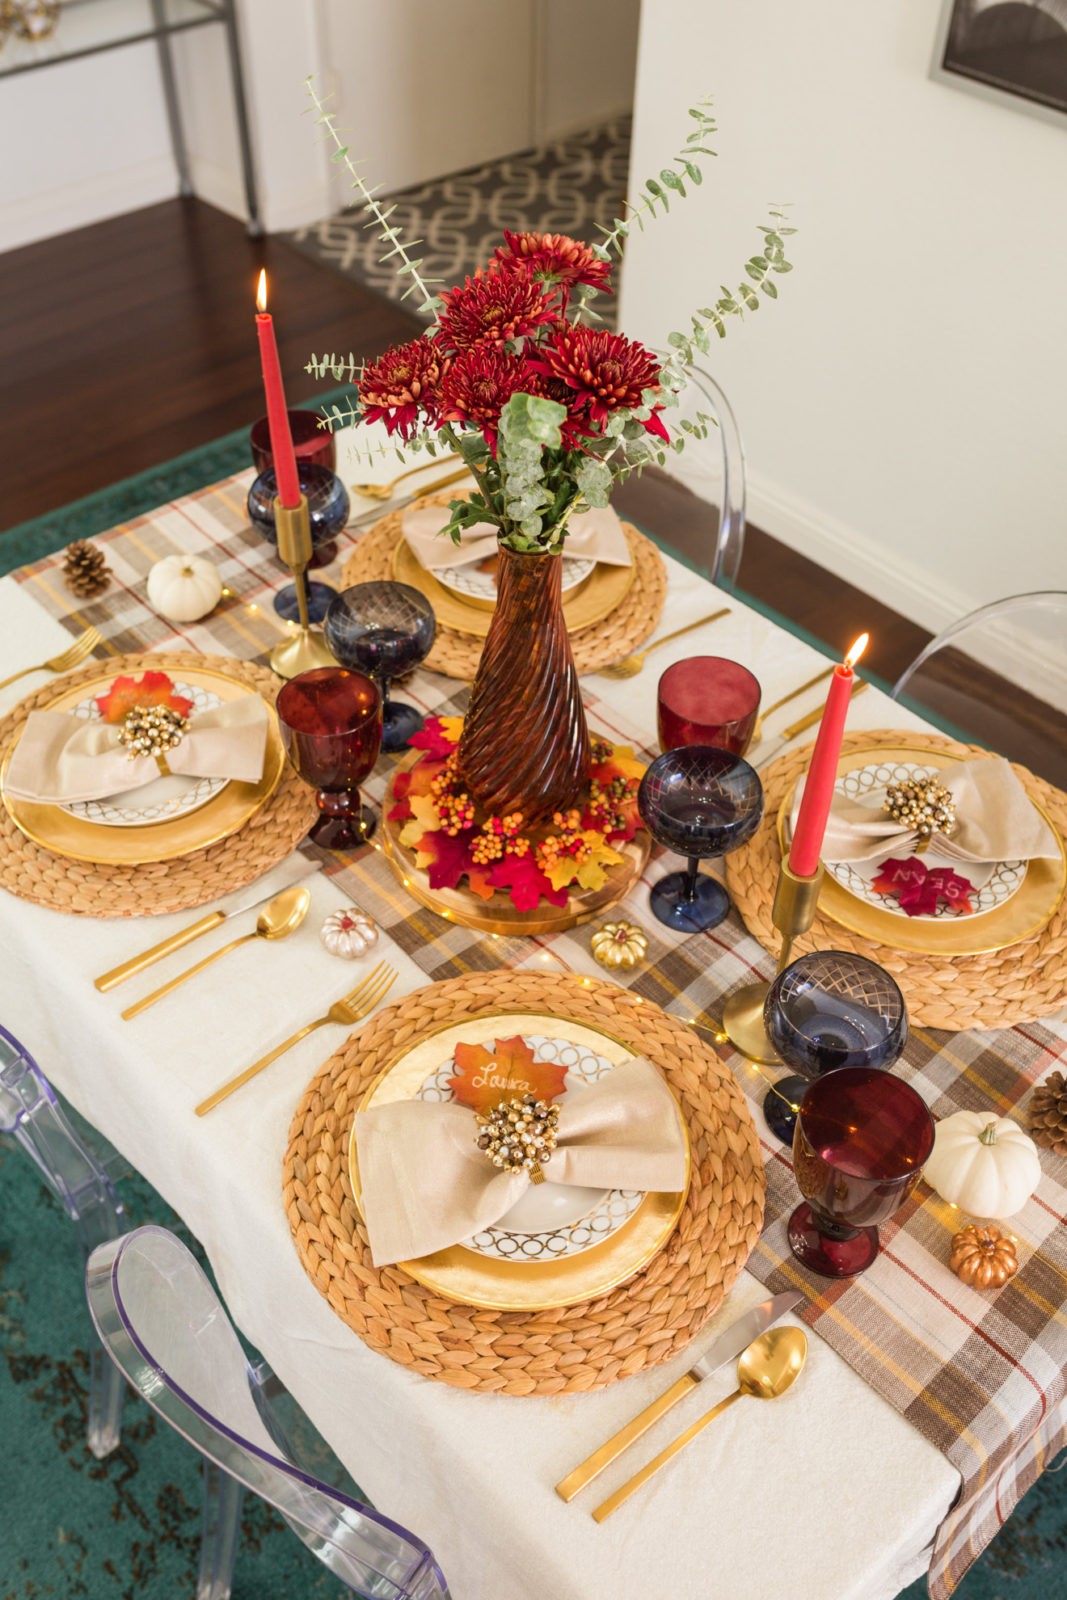 Easy Thanksgiving Table Setting Ideas by Lifestyle Blogger Laura Lily | Dinner Party Essentials: Hosting Tips, Table Settings Ideas and Bar Cart Inspiration by popular Los Angeles life and style blogger, Laura Lily: image of a table set with red candles, woven placemats, plaid table runner, gold plates, gold flatware, and red and blue glasses.